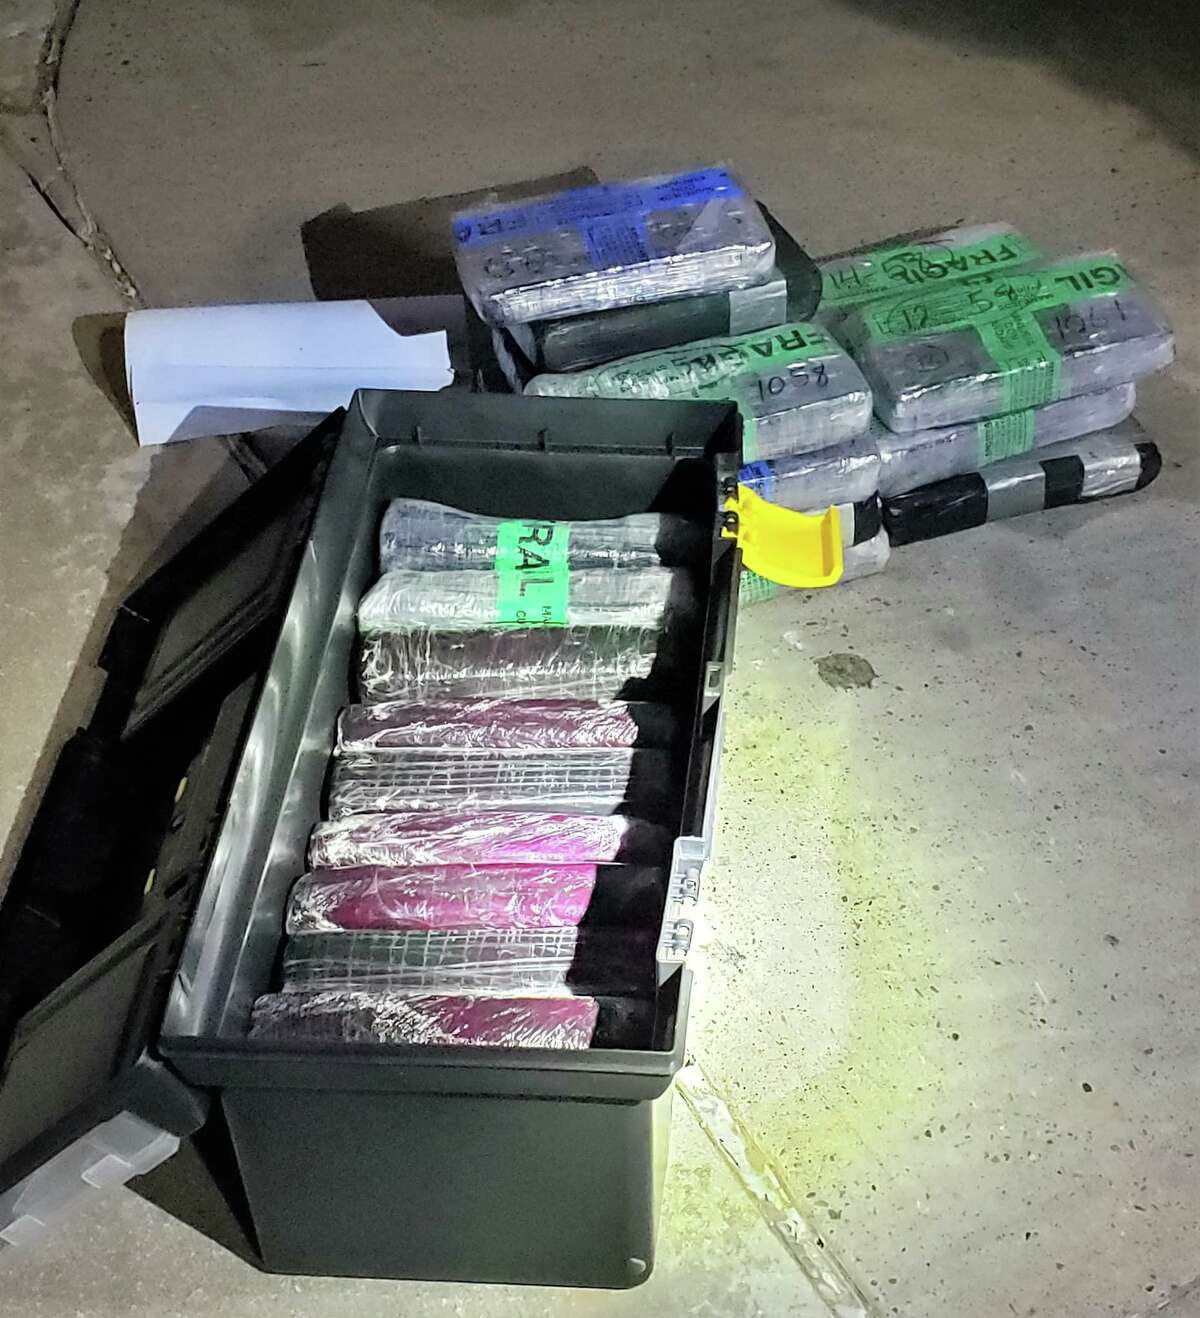 U.S. Border Patrol agents said they recently seized $1.8 million in cocaine at the Interstate 35 checkpoint. A man was arrested in connection with the case.